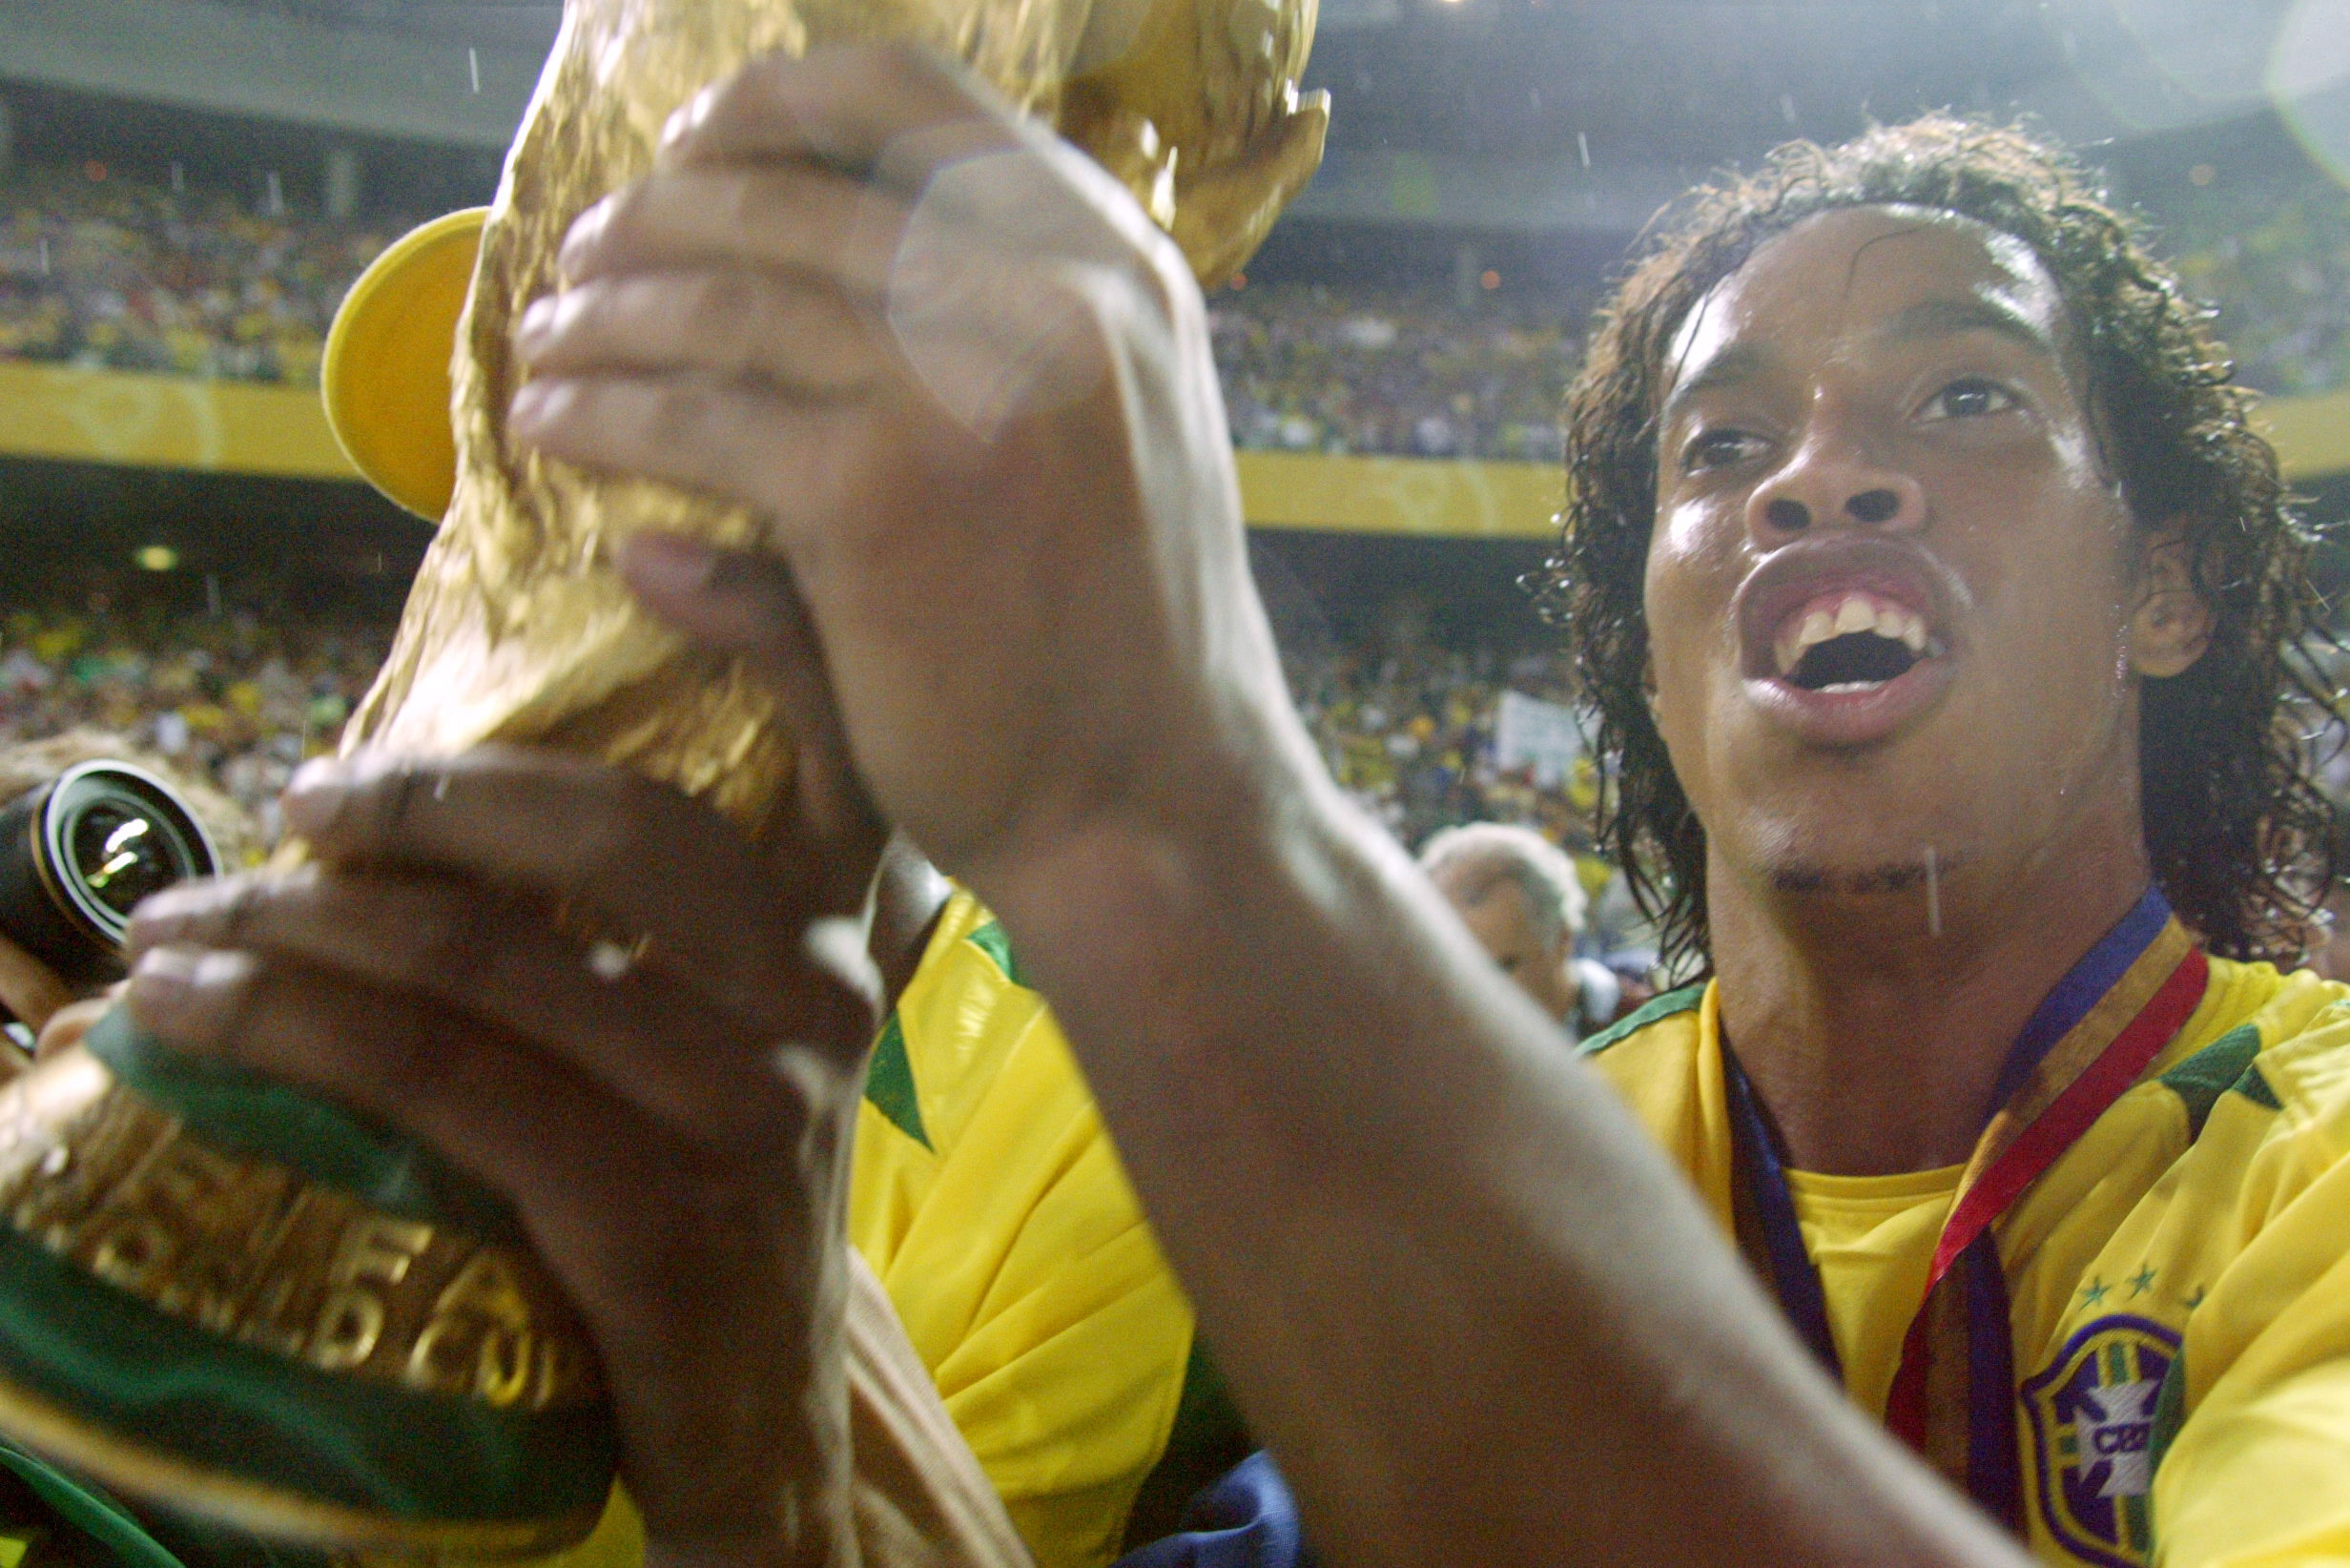 Why was Ronaldinho not called up for FIFA World Cup 2010? - Quora